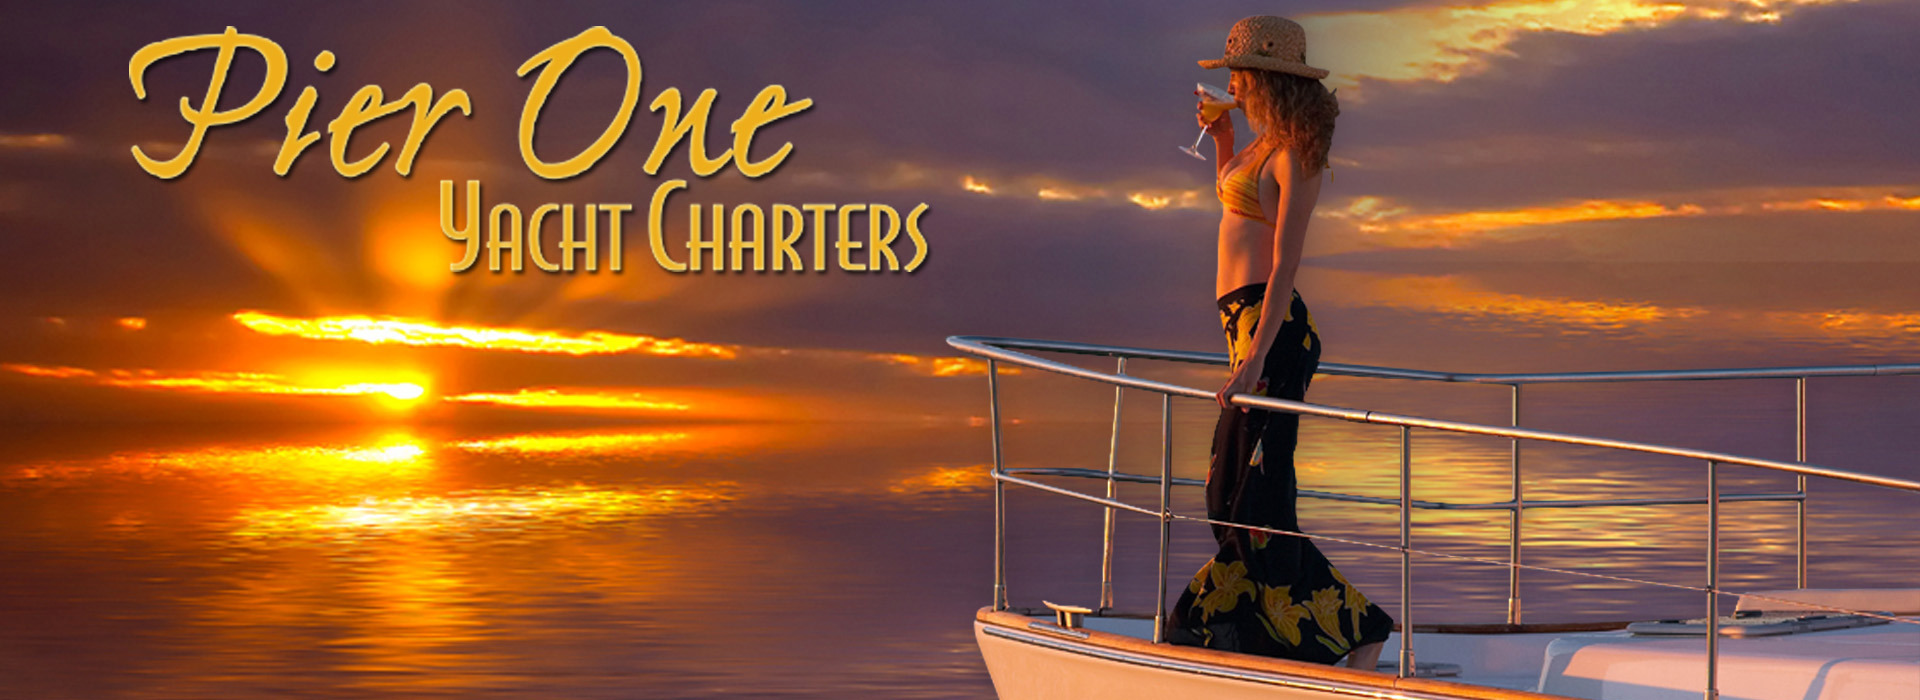 PIER ONE YACHT CHARTERS